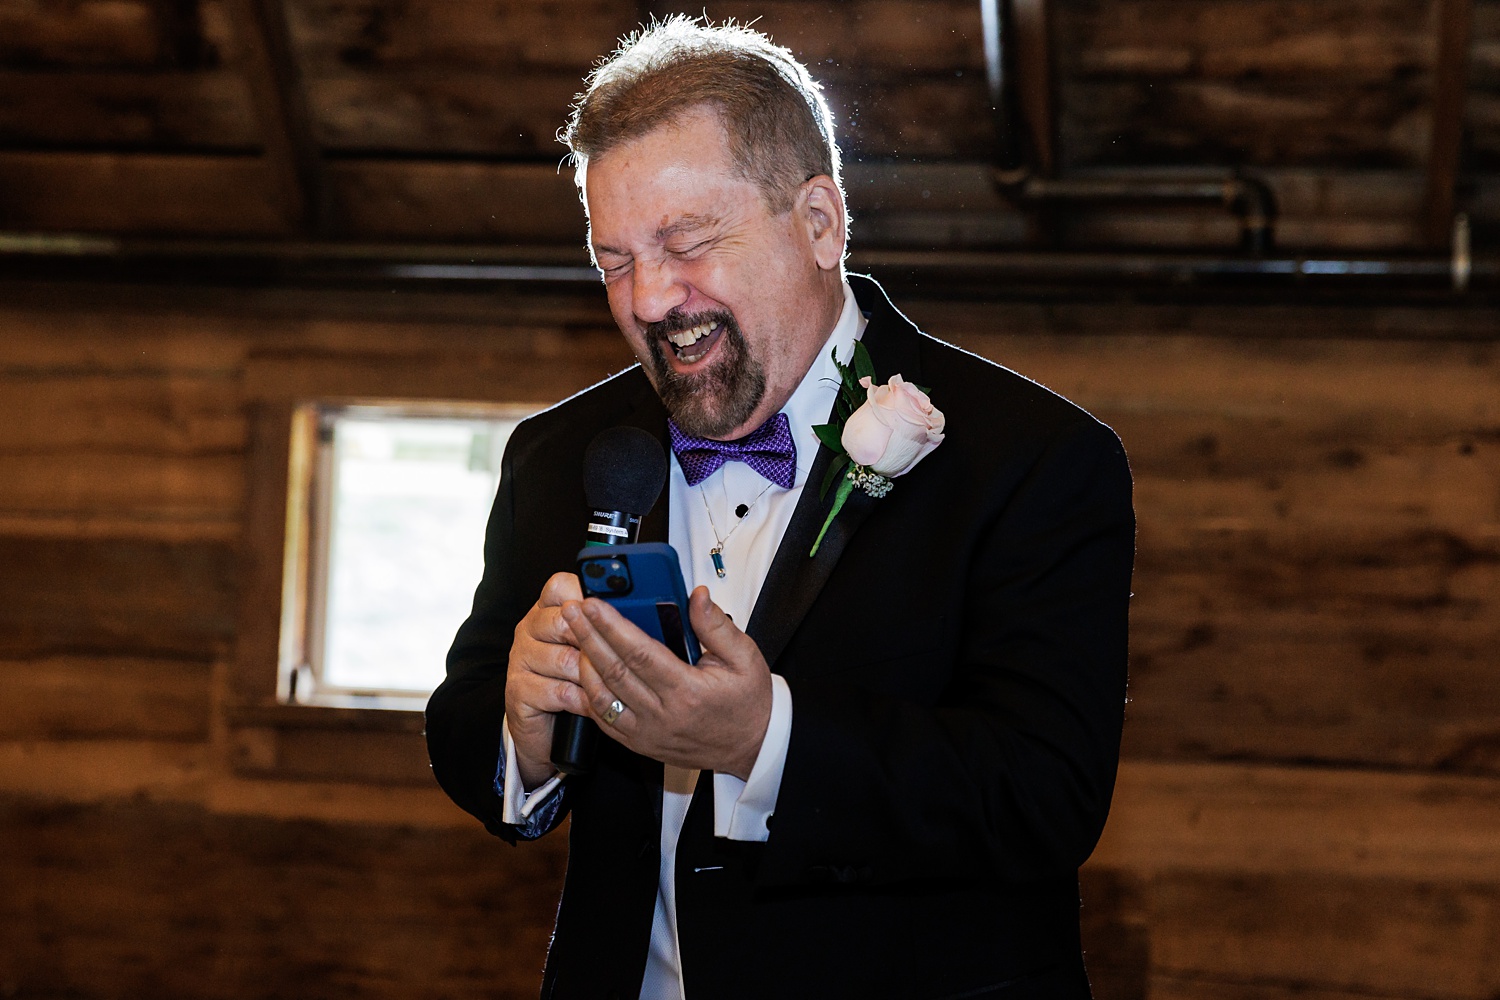 Father of the bride laughs to stop from crying during his toast